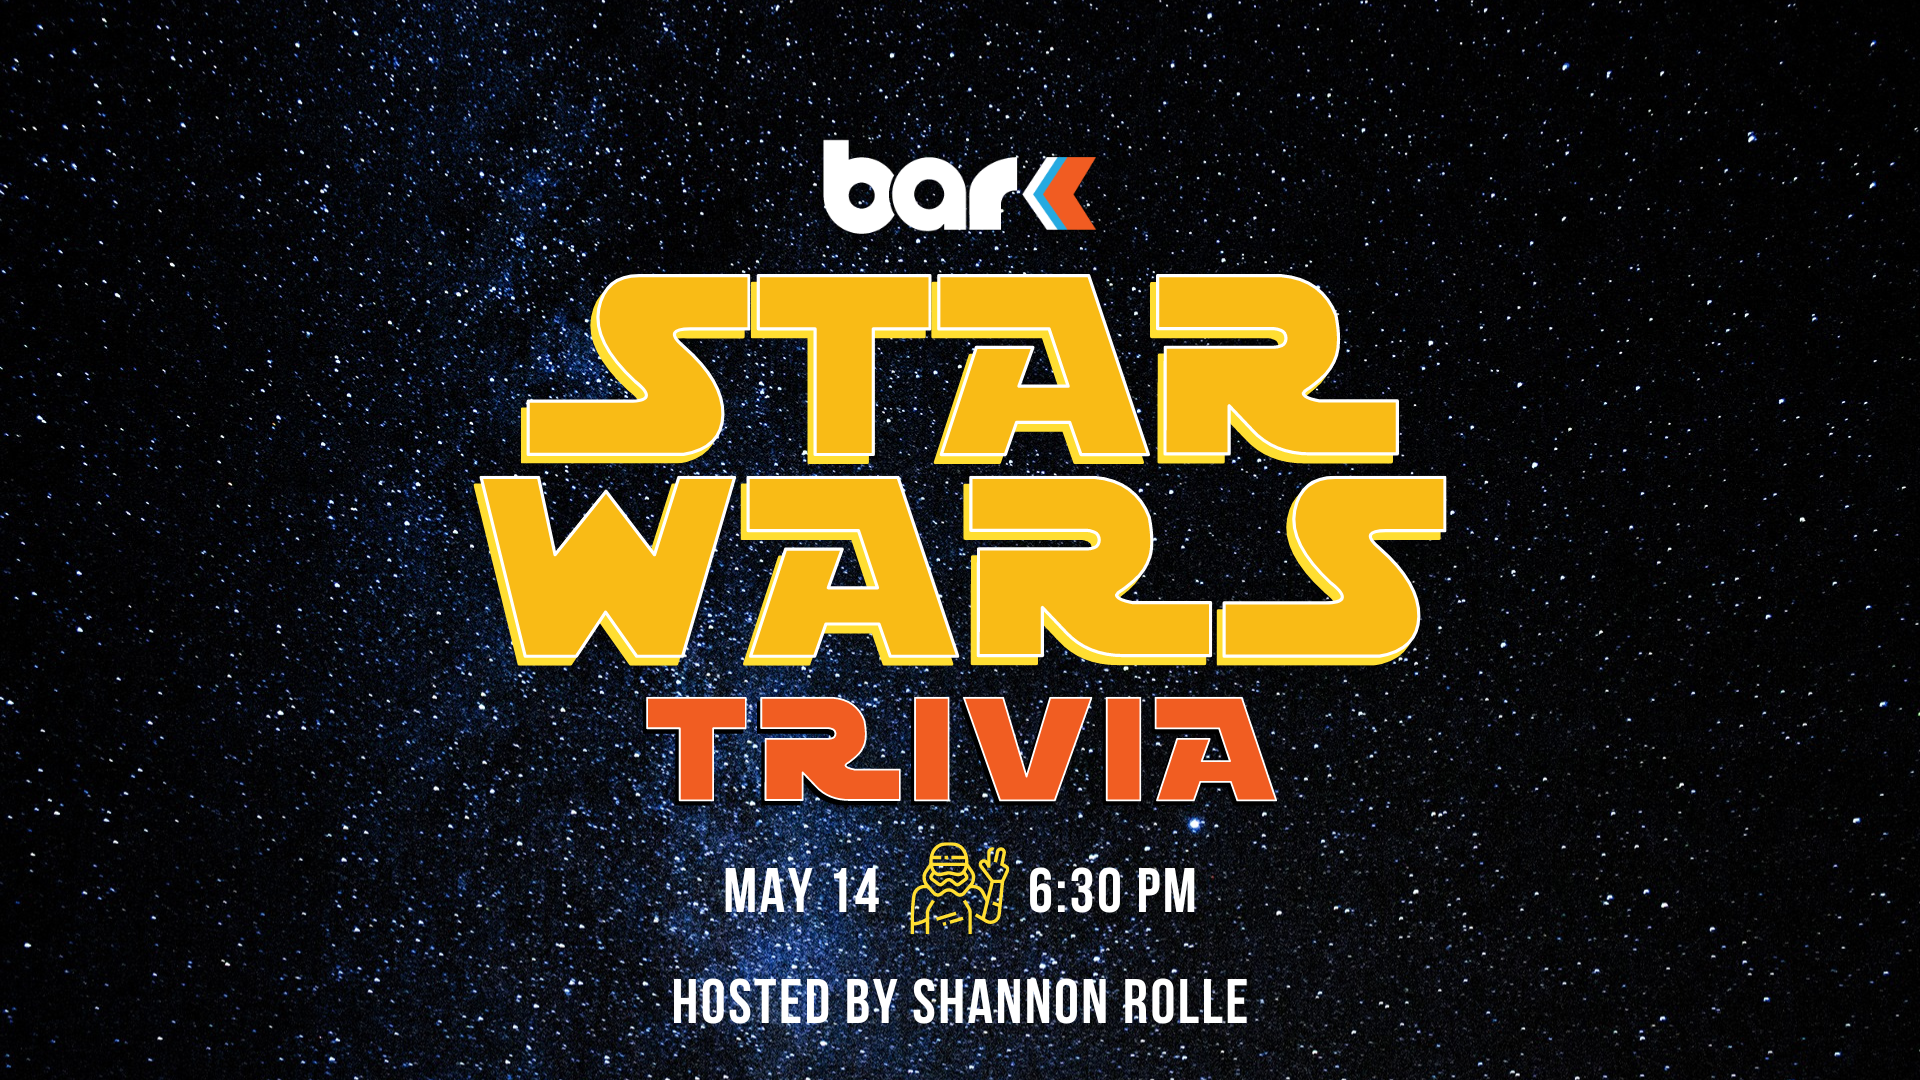 Bark Star wars trivia May 14 6:30 PM Hosted by Shannon Rolle